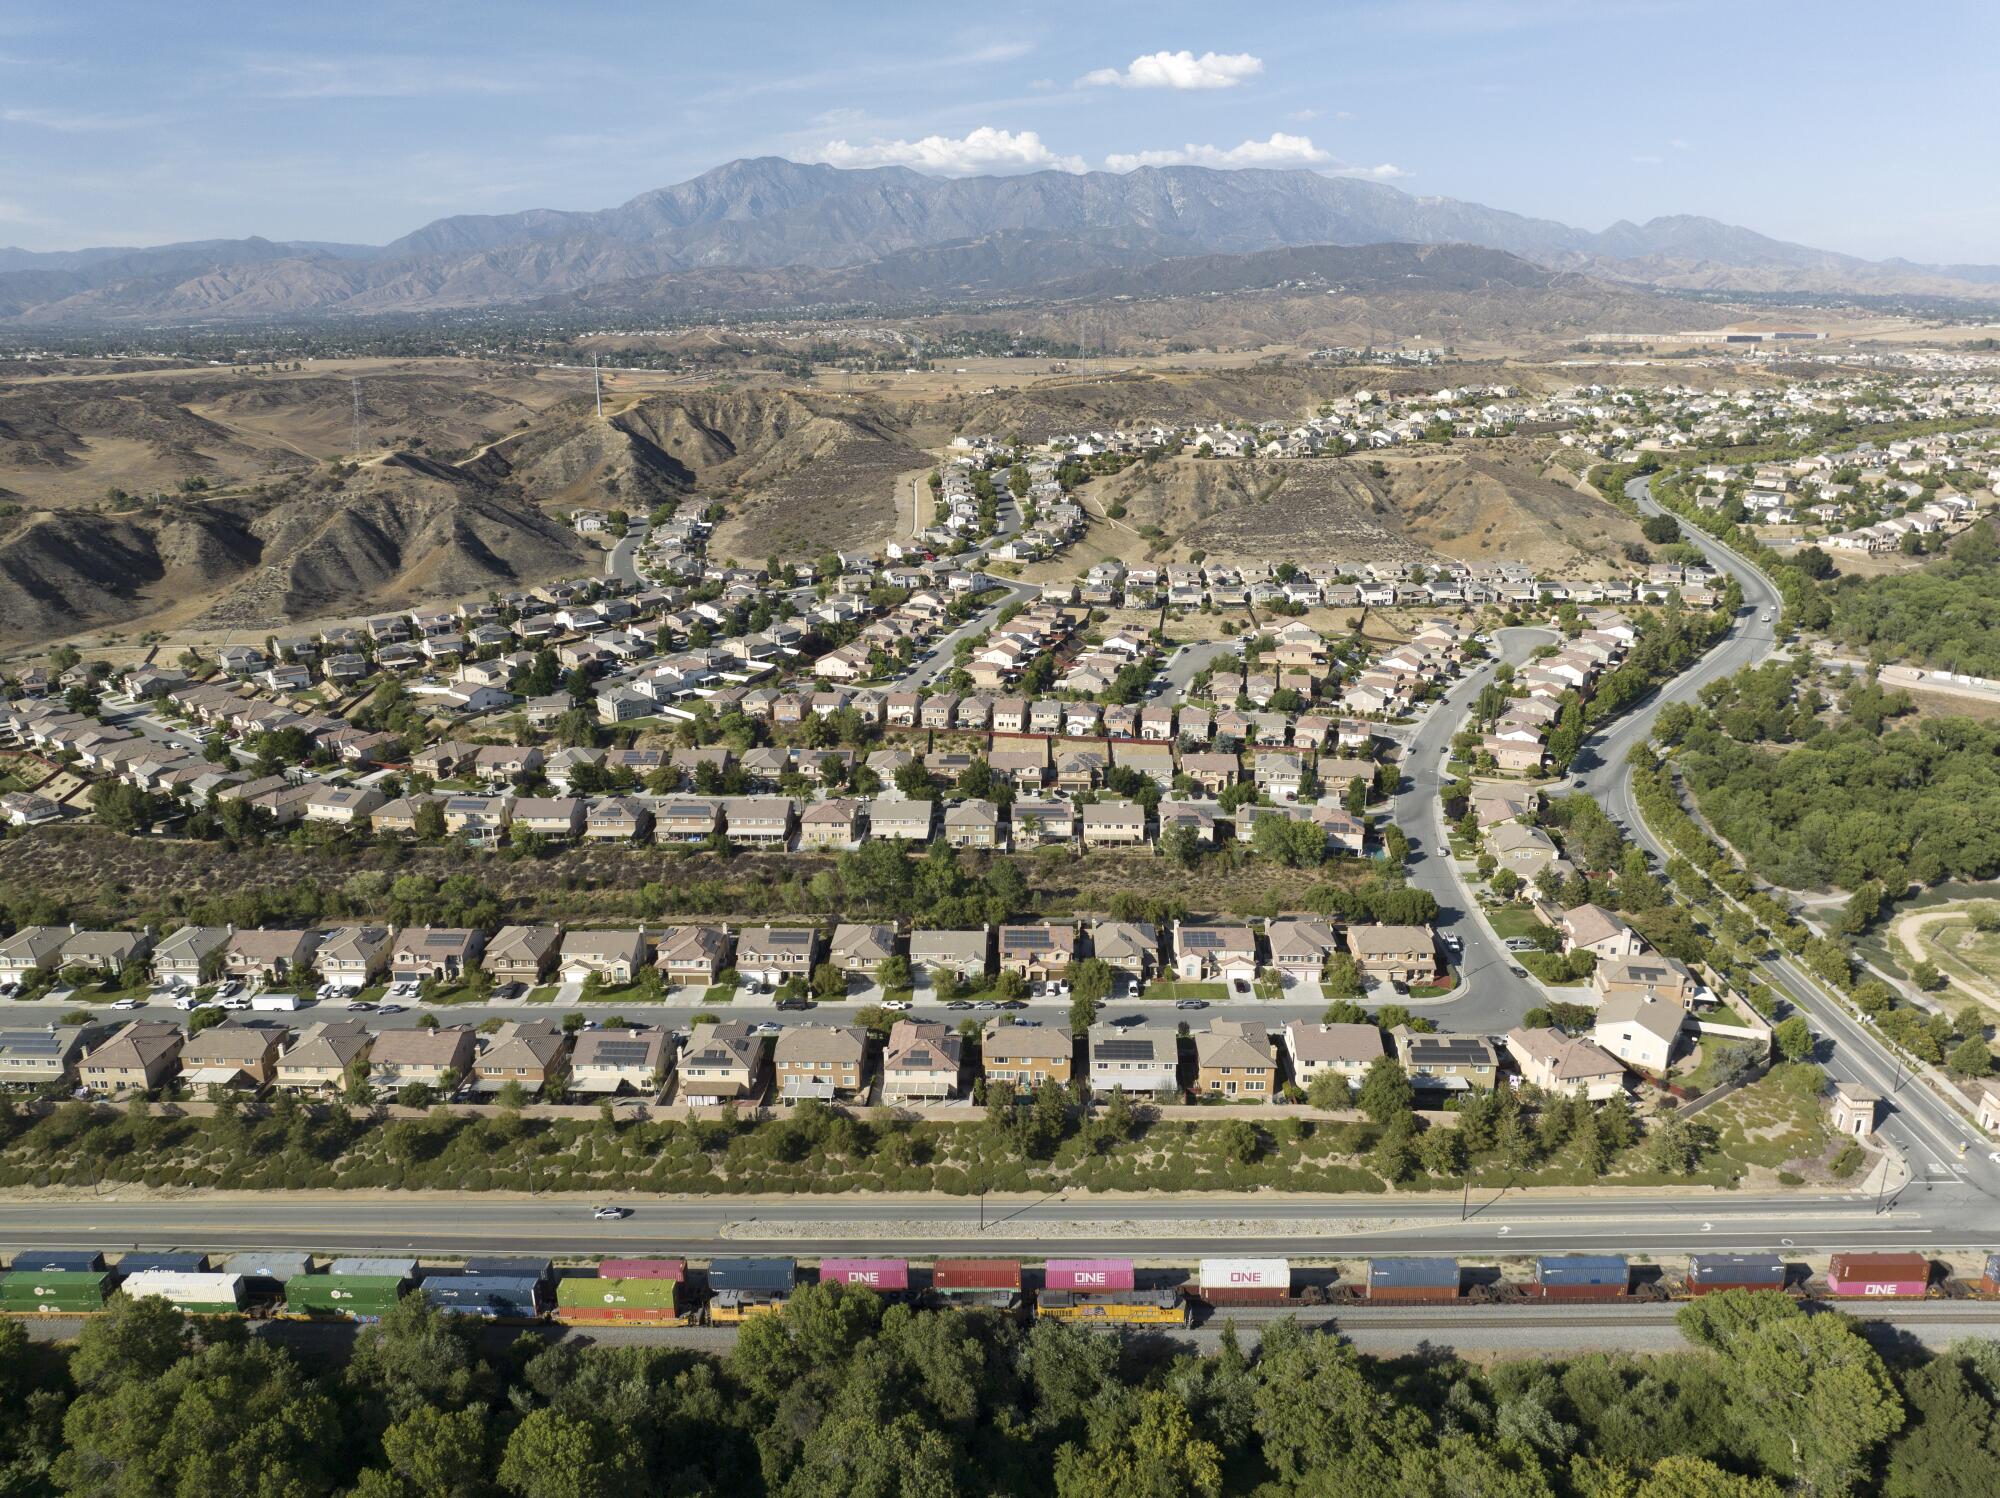 A train passing a housing development with mountains in the background